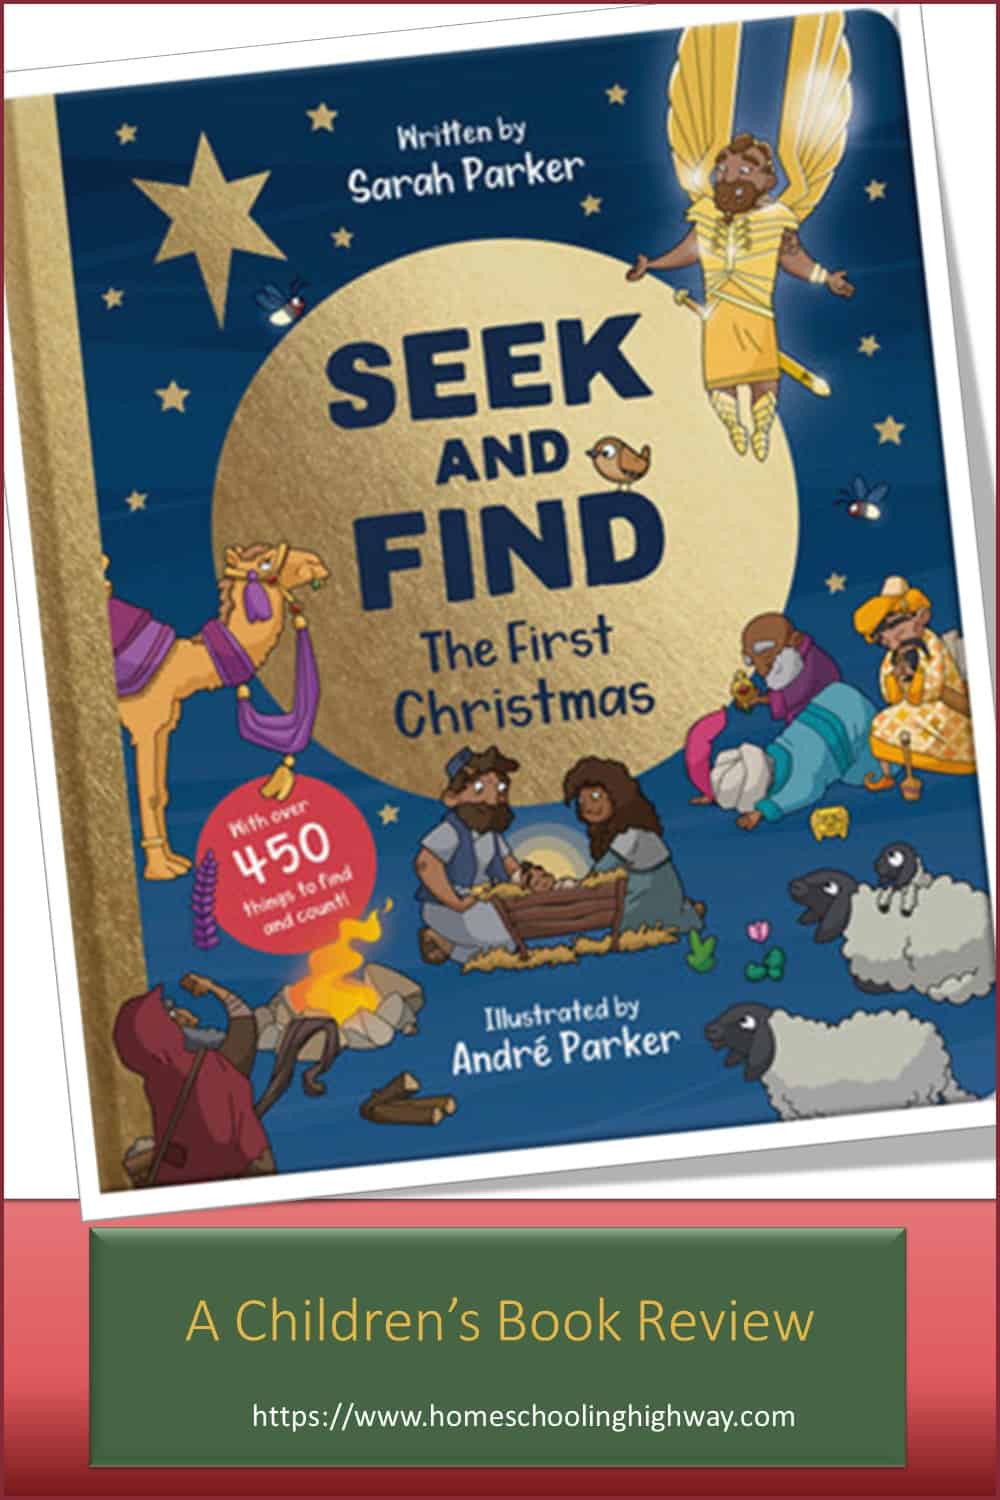 Seek and Find: The First Christmas written by Sarah Parker. Book reviewed by Homeschooling Highway